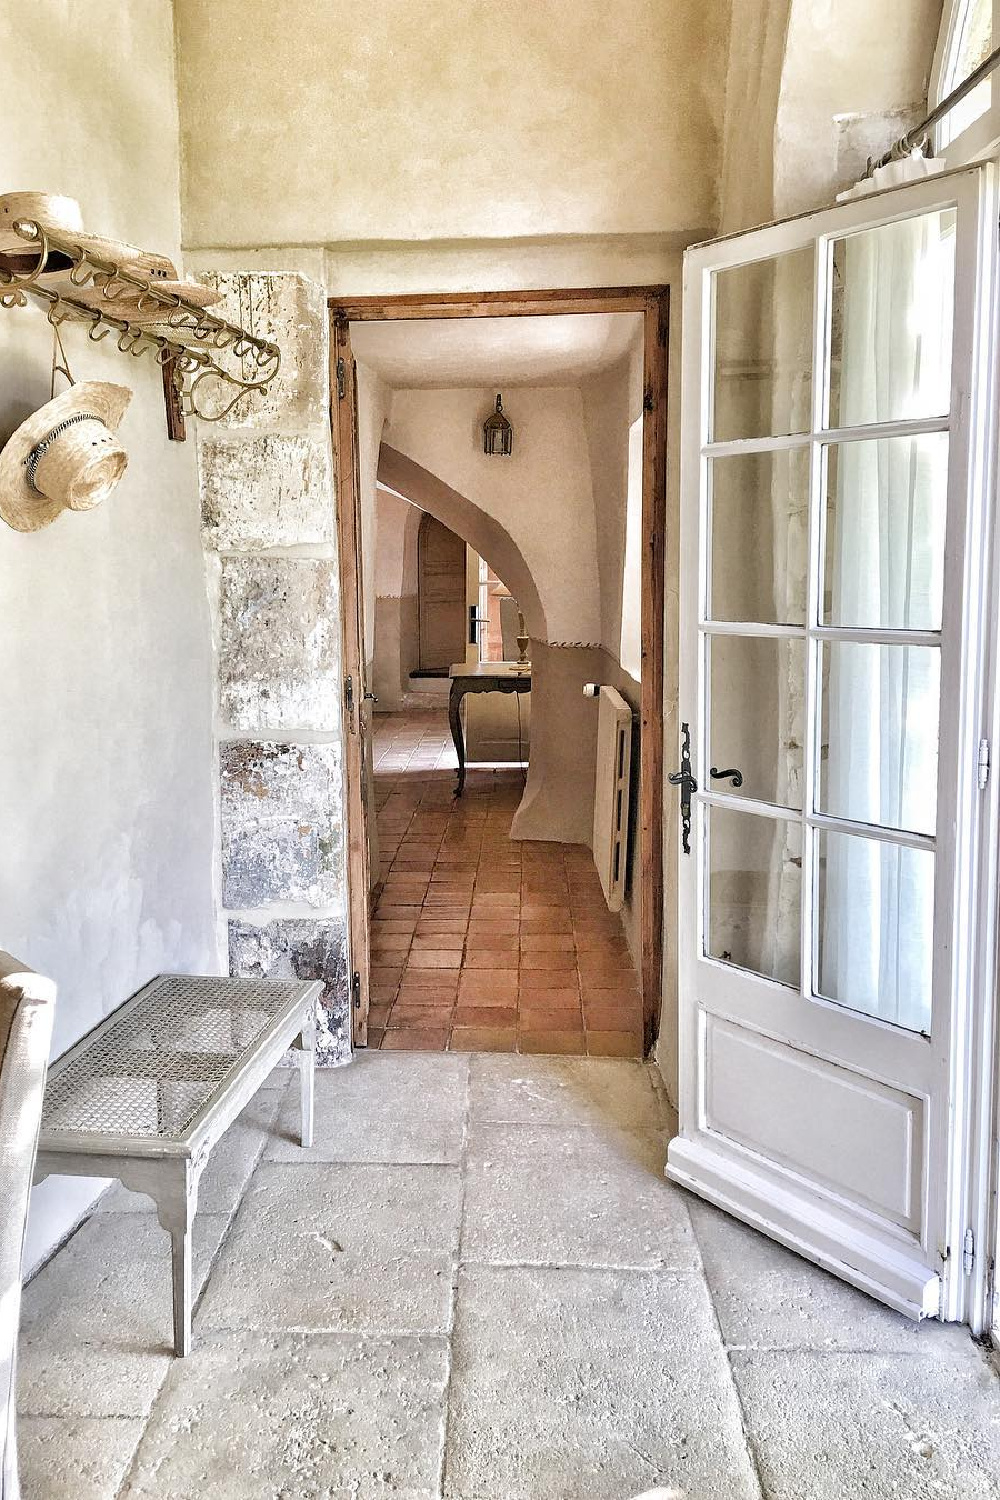 Rugged stone walls in a charming entry of a French country home - Vivi et Margot.